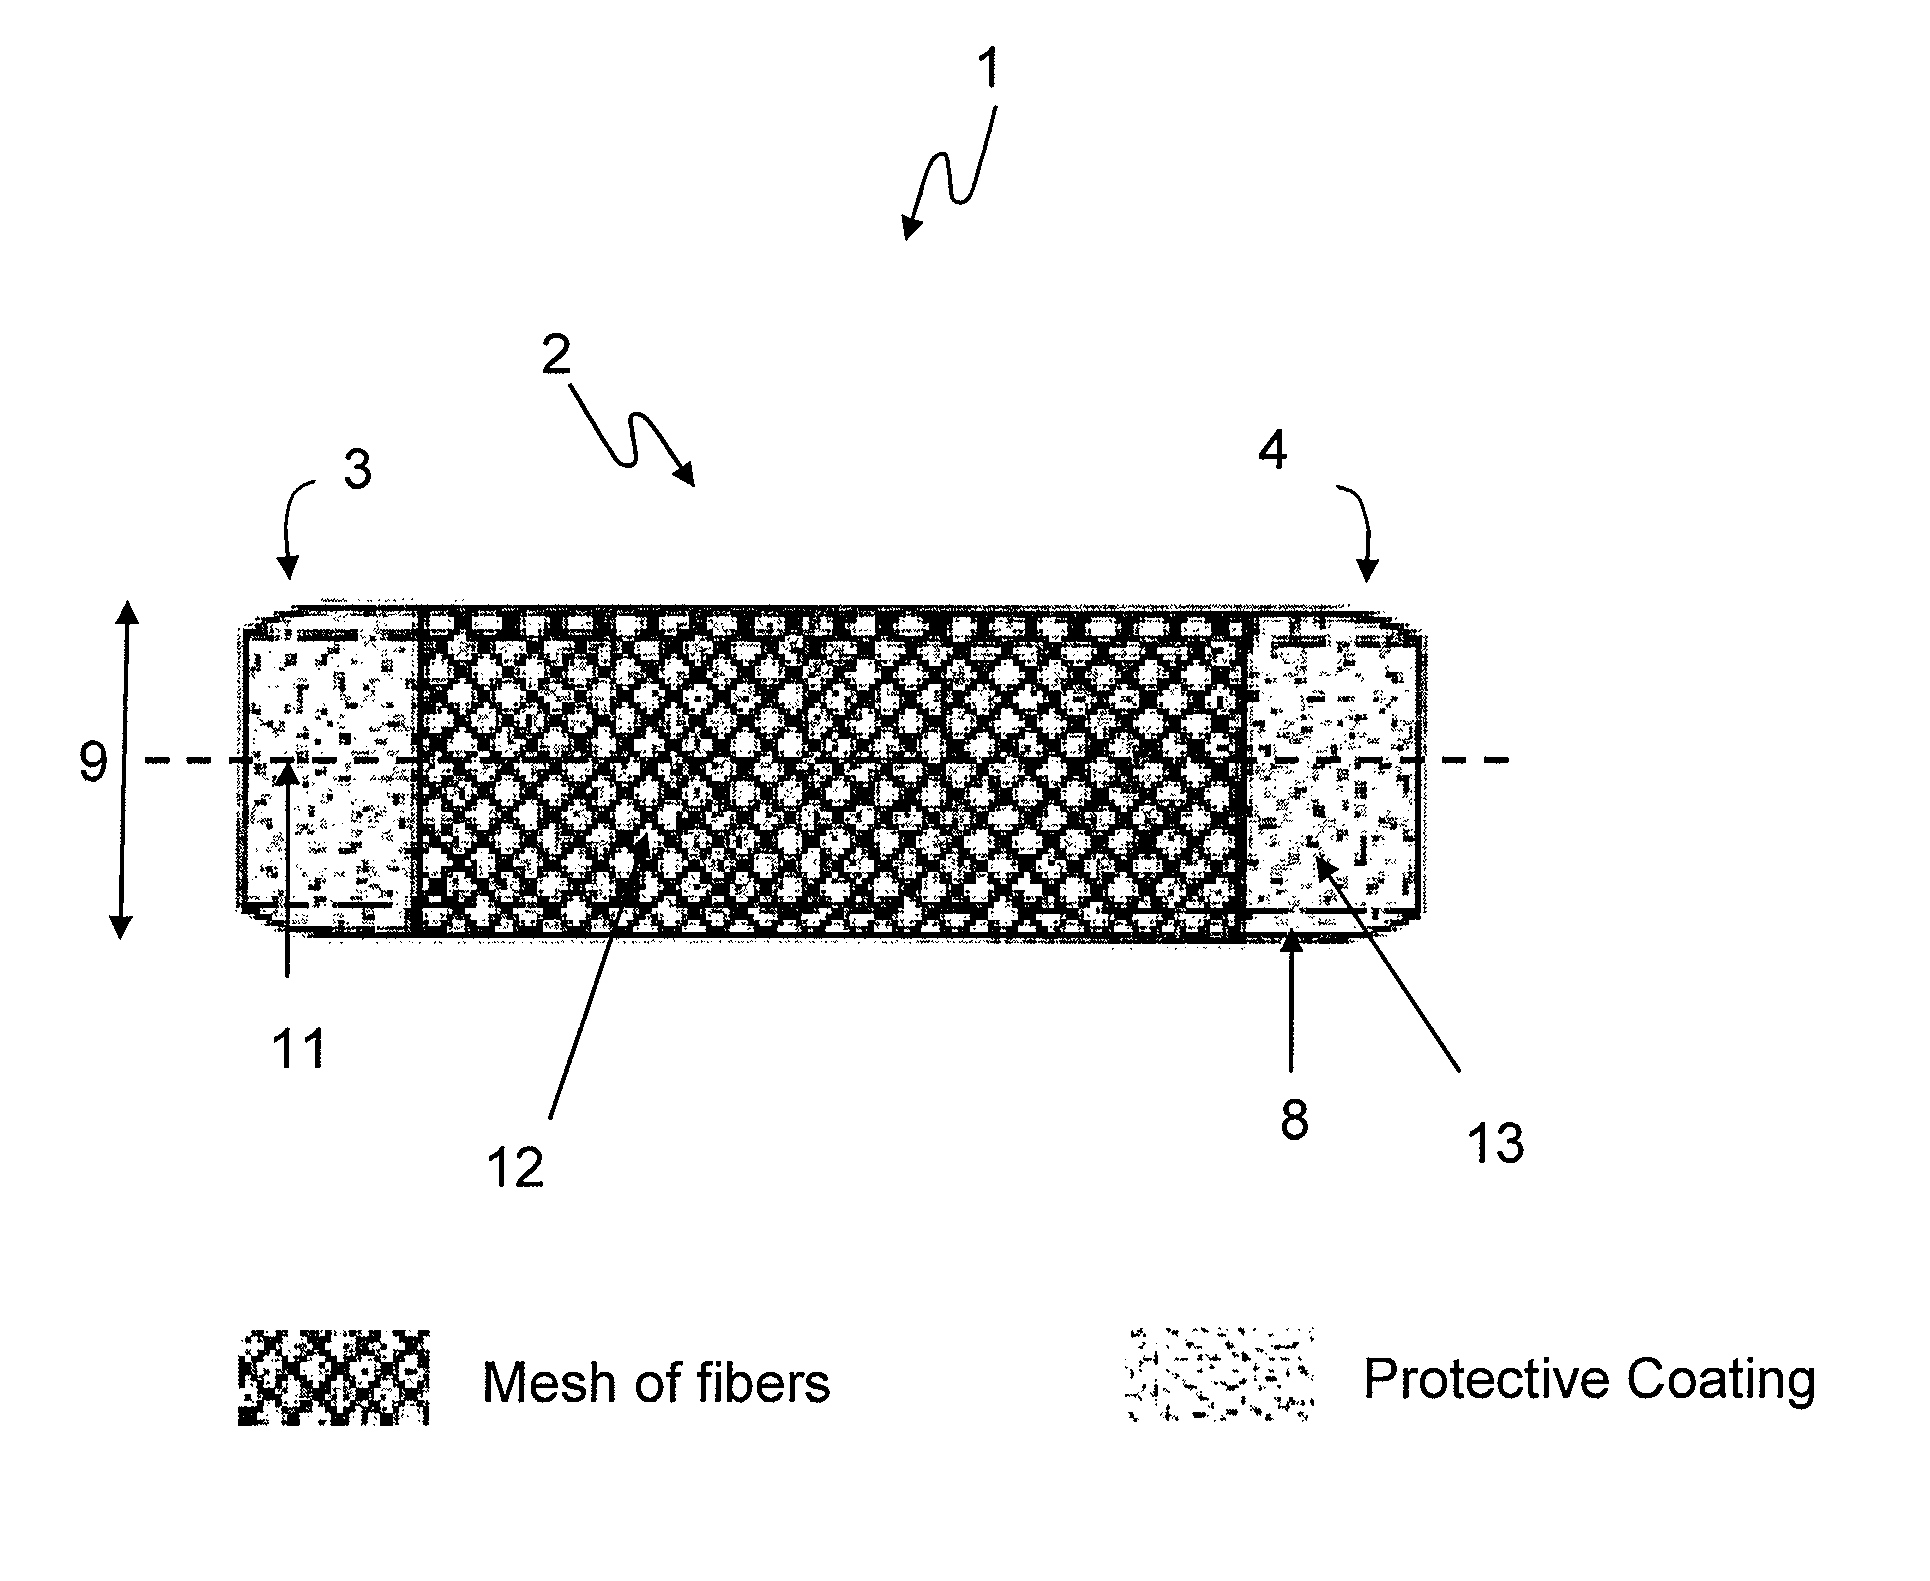 Coated devices comprising a fiber mesh imbedded in the device walls